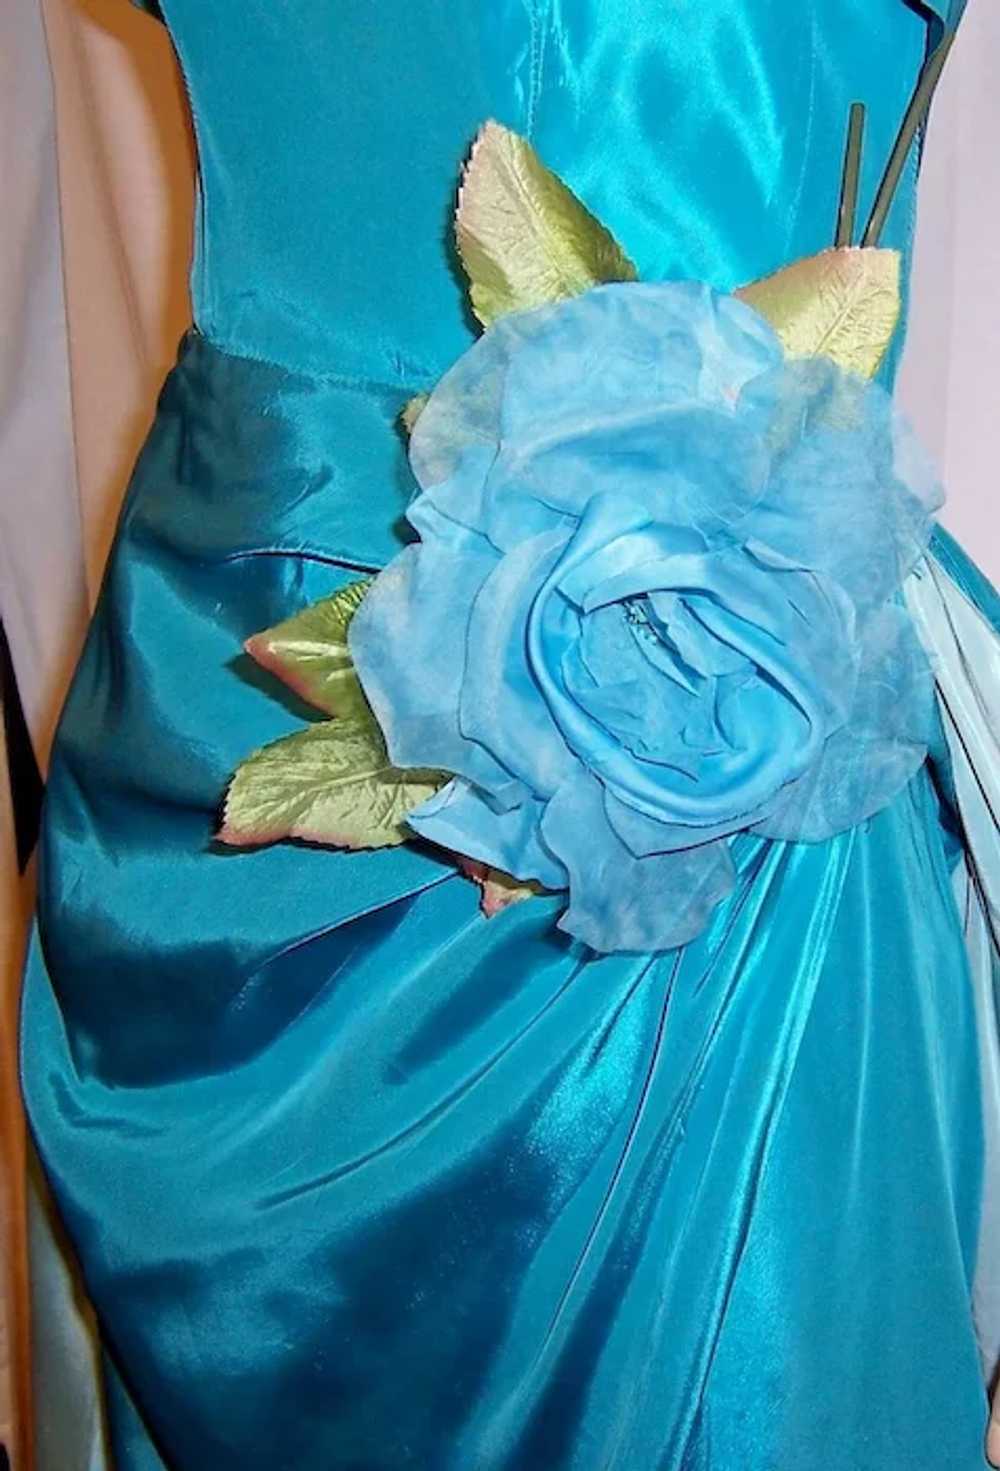 Two-Toned Turquoise Taffeta Strapless Gown - image 6